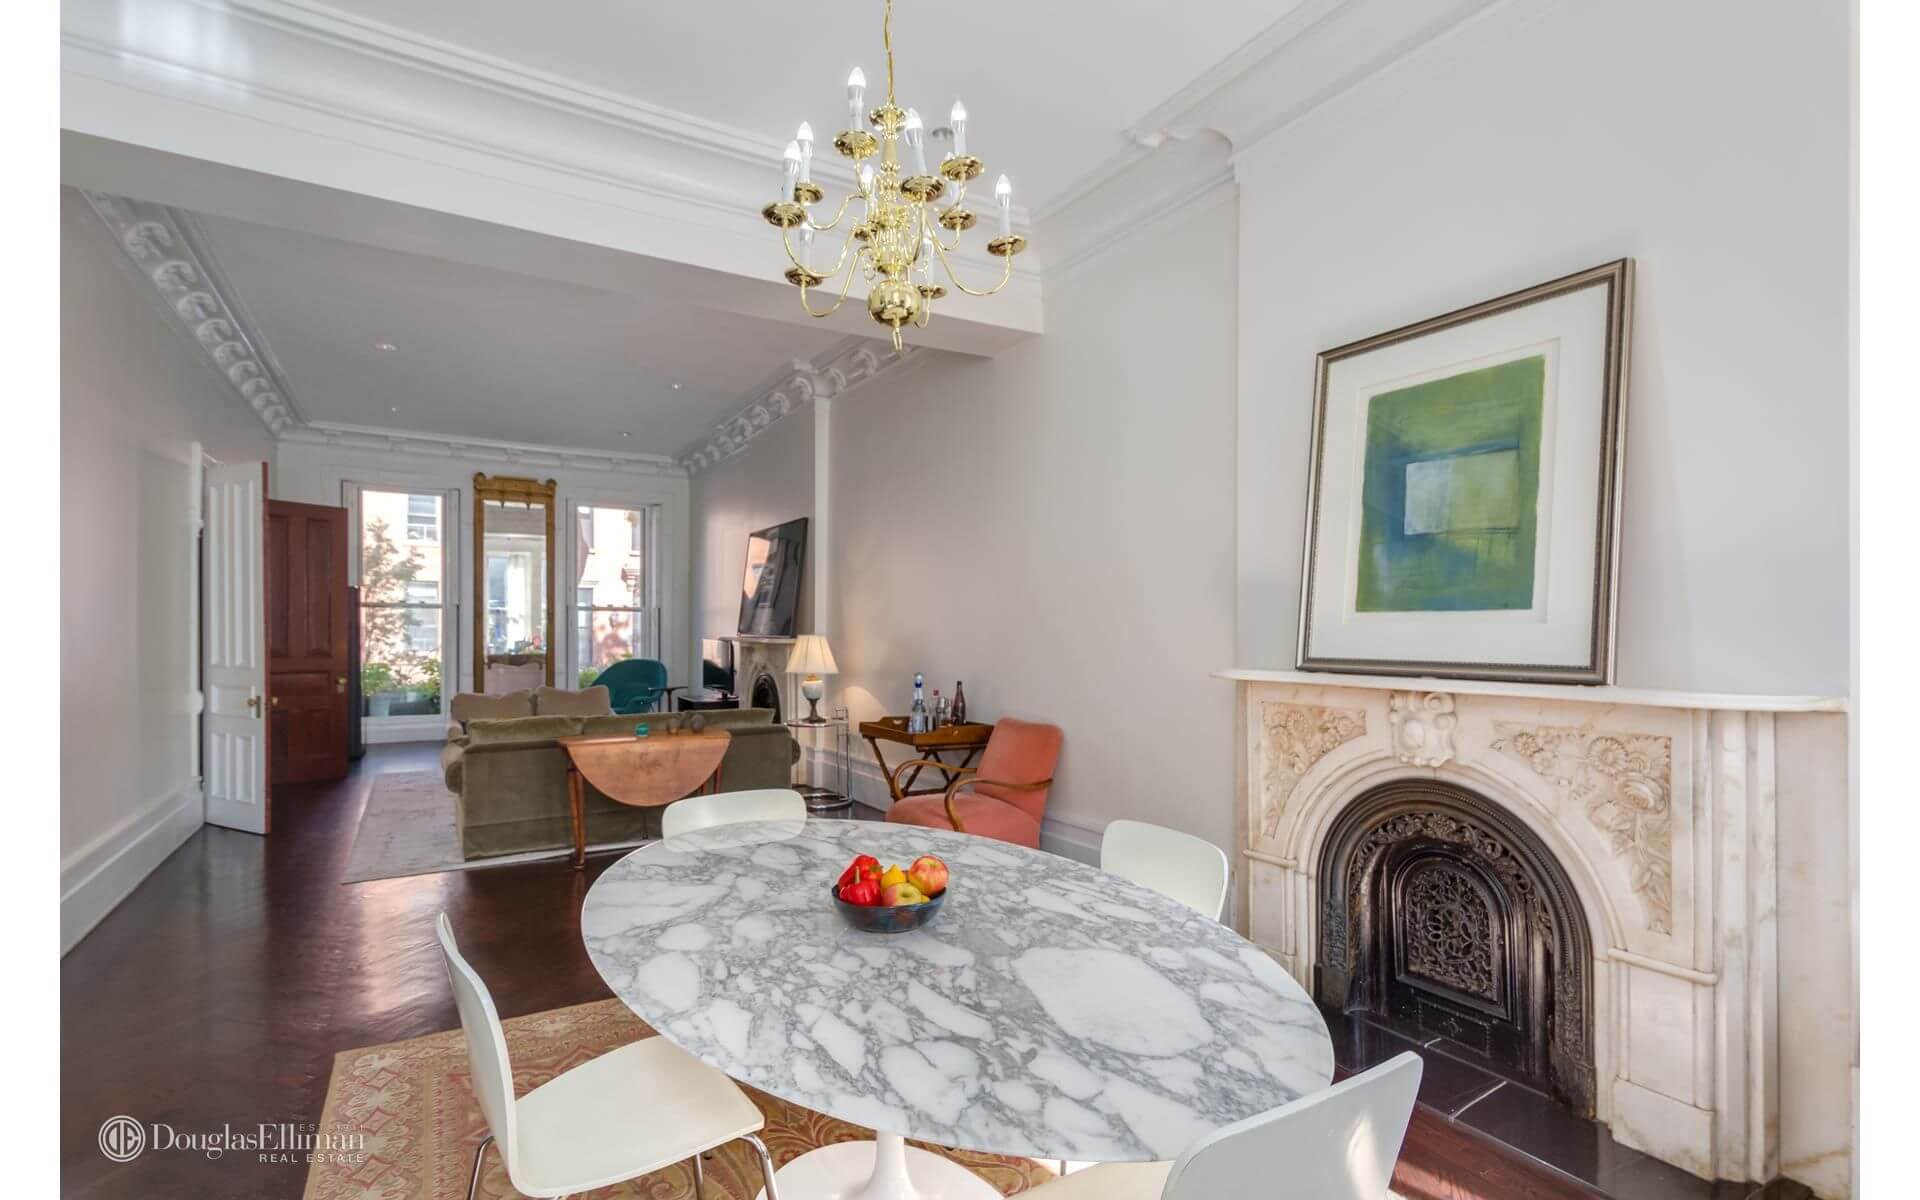 Brooklyn Homes for Sale in Park Slope, Bed Stuy, Fort Greene